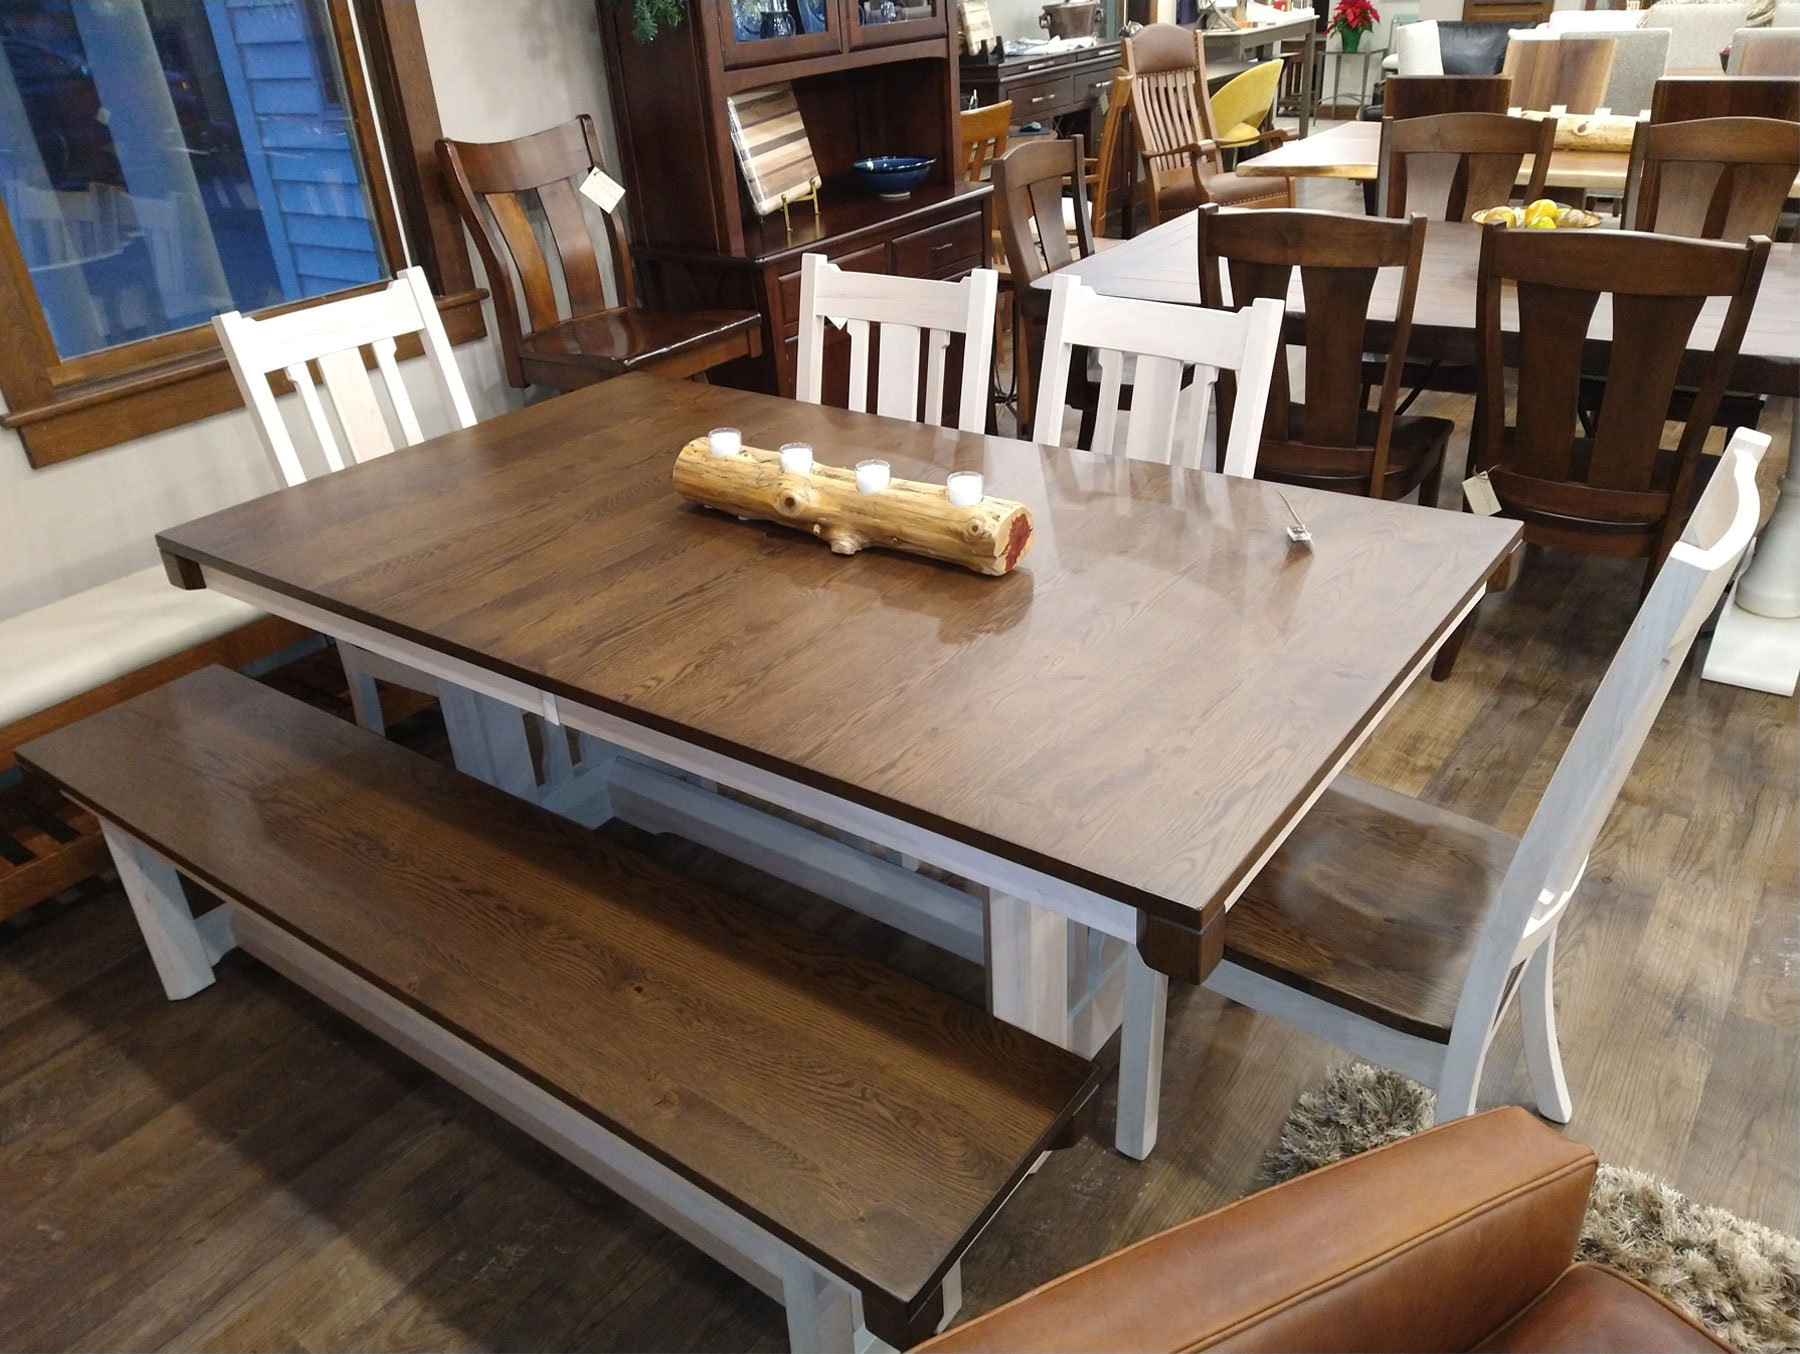 Dundee 42 x 72 Dining Table with (2) Leaves, (4) Chairs and (1) Dining Bench